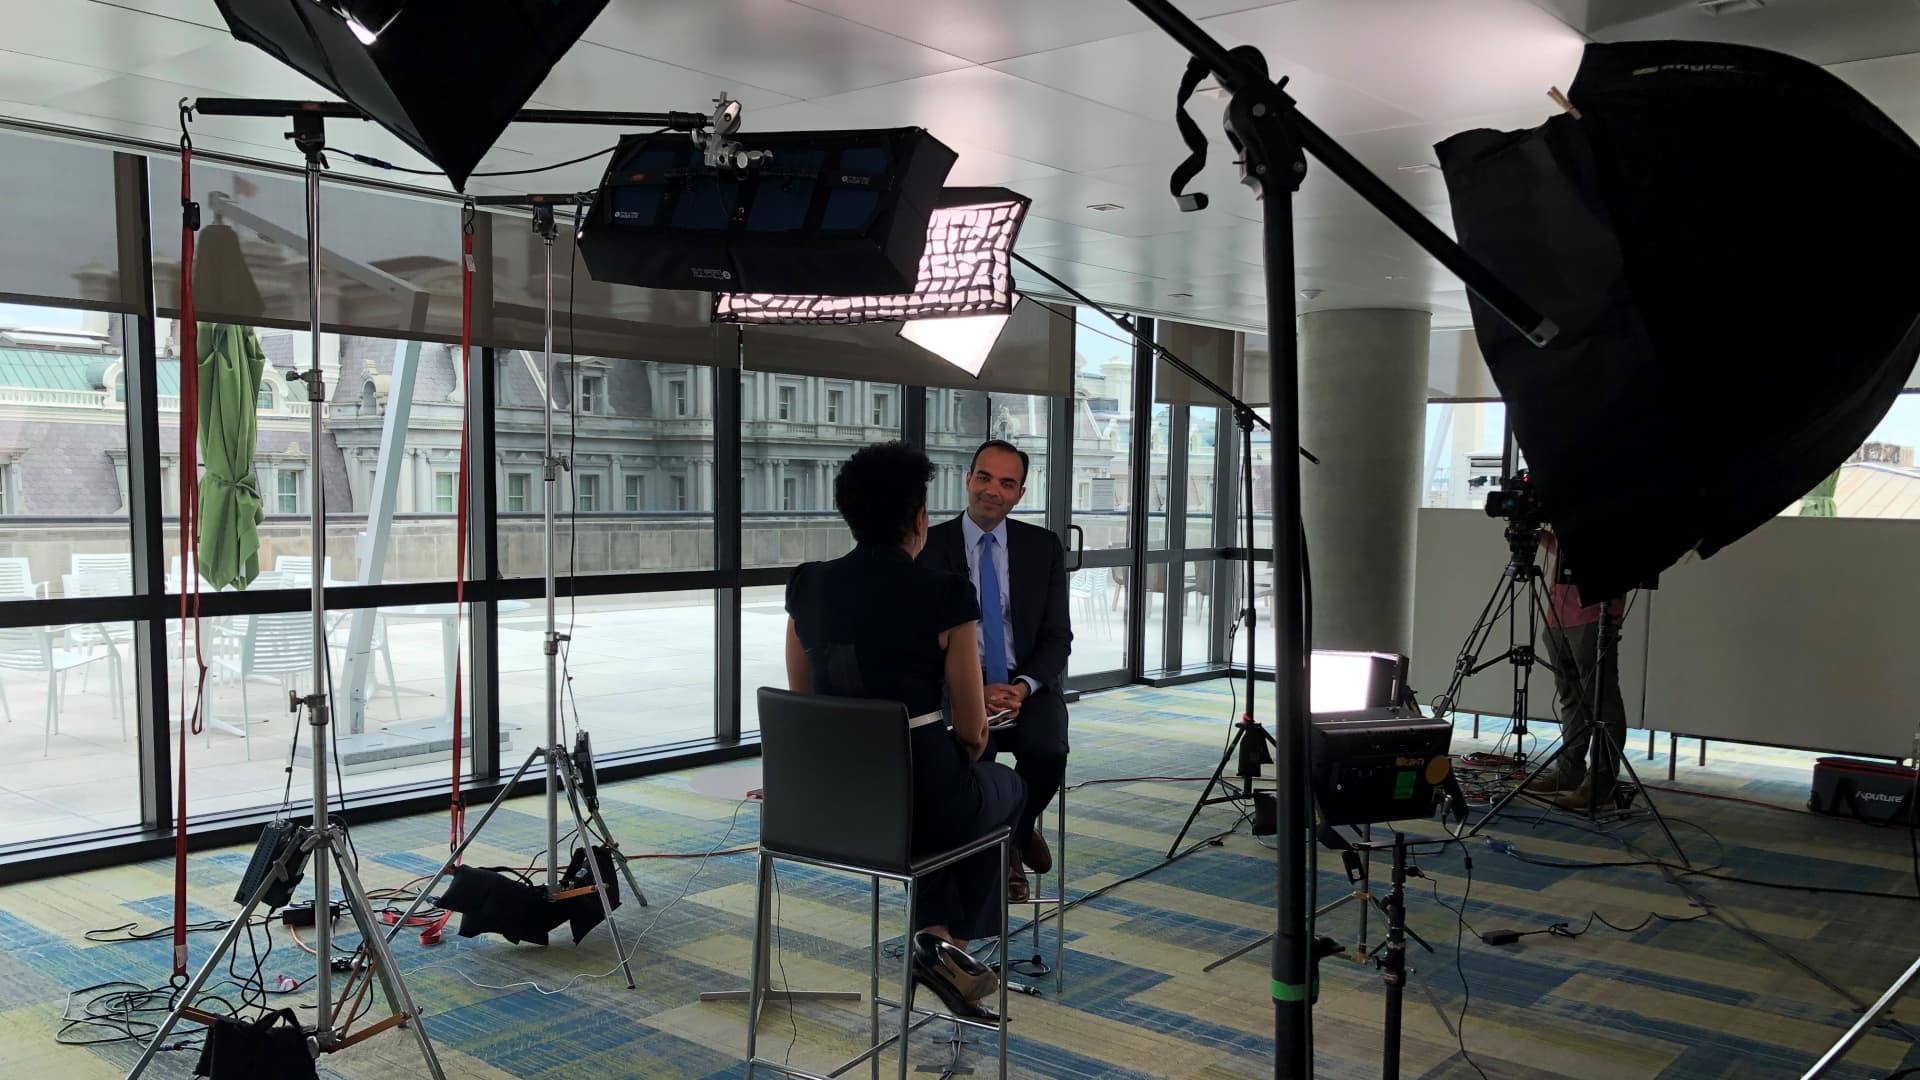 Director Rohit Chopra sits down with CNBC's Senior Personal Finance Correspondent Sharon Epperson at CFPB headquarters in Washington, D.C.